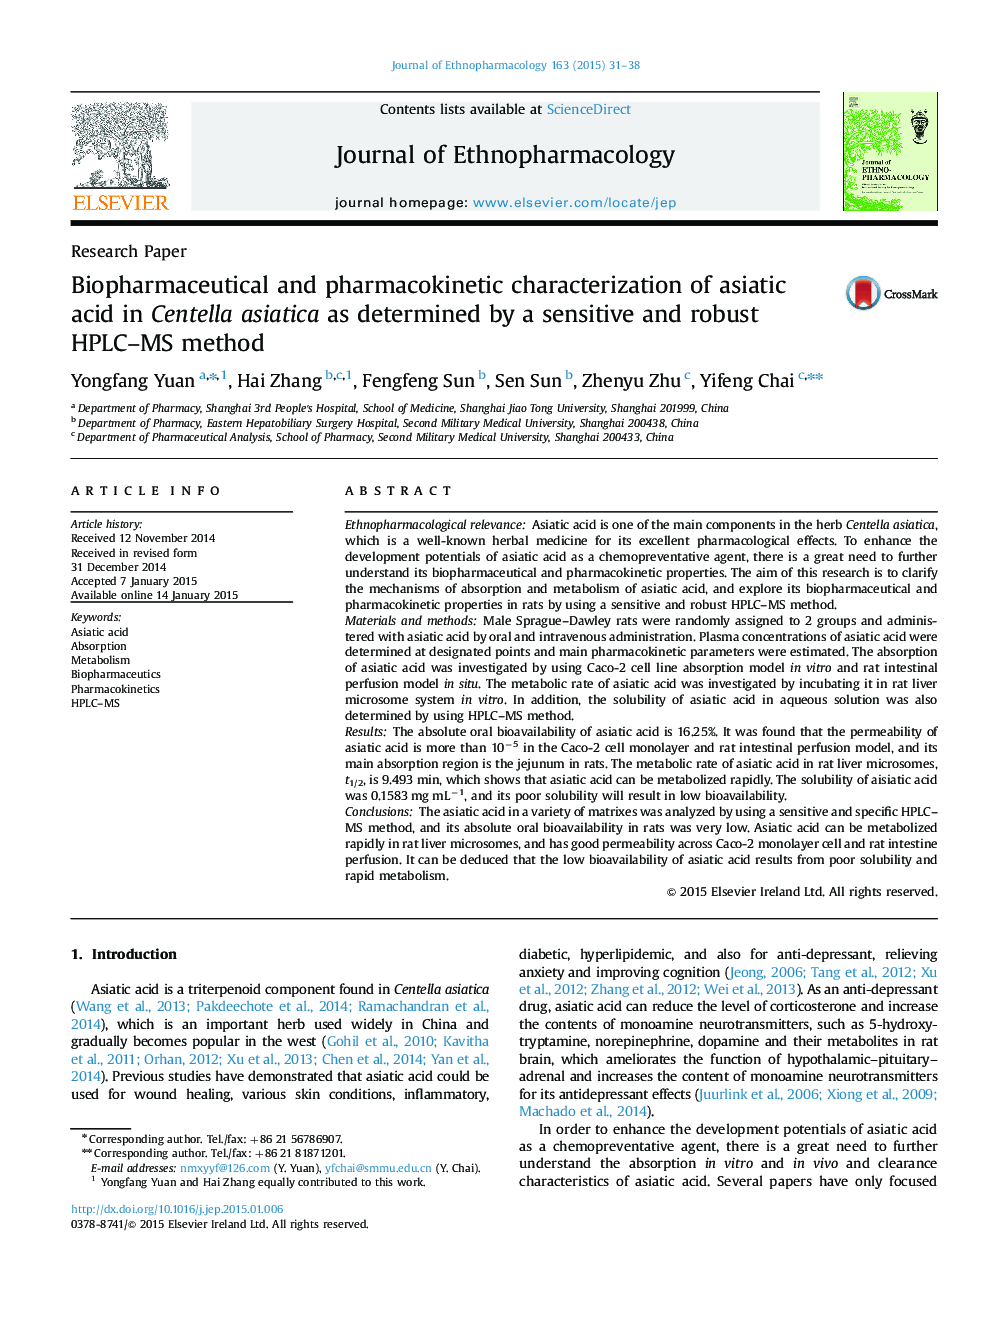 Biopharmaceutical and pharmacokinetic characterization of asiatic acid in Centella asiatica as determined by a sensitive and robust HPLC–MS method